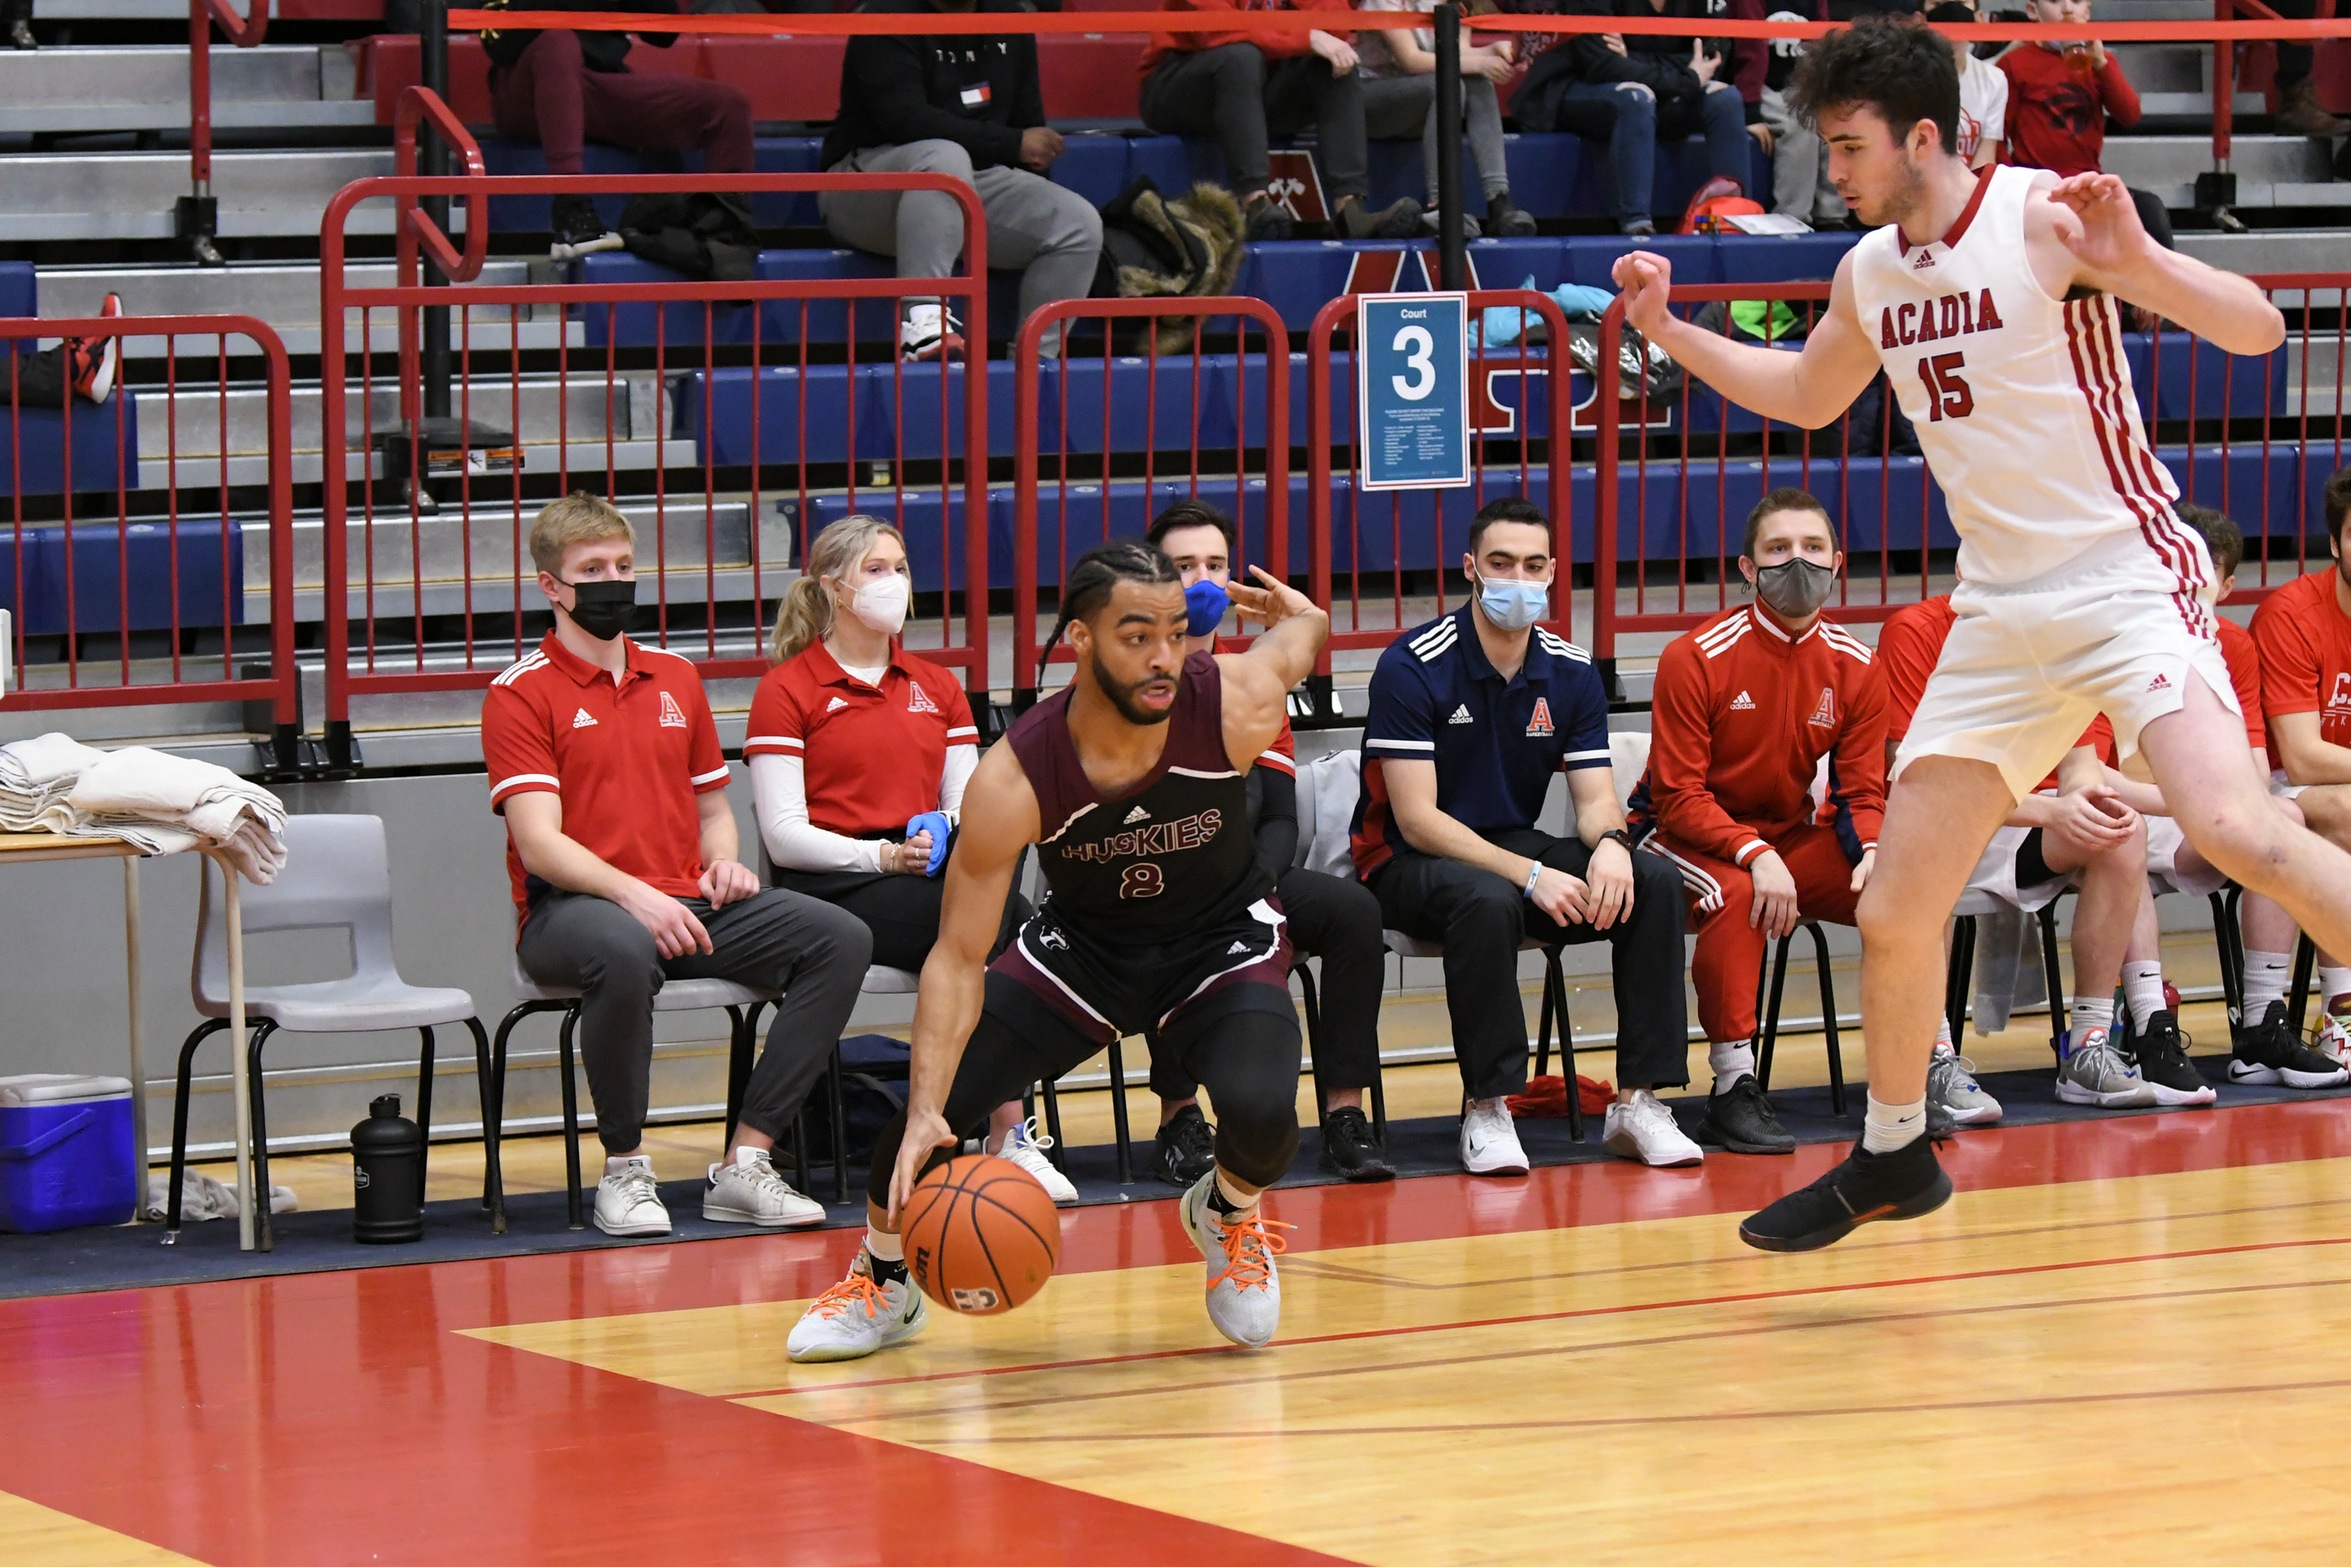 Saint Mary's Huskies guard Shae Linton-Brown scored 20 points to lead the Huskies to a 76-74 comeback win over the Acadia Axemen on Feb. 27, 2022.